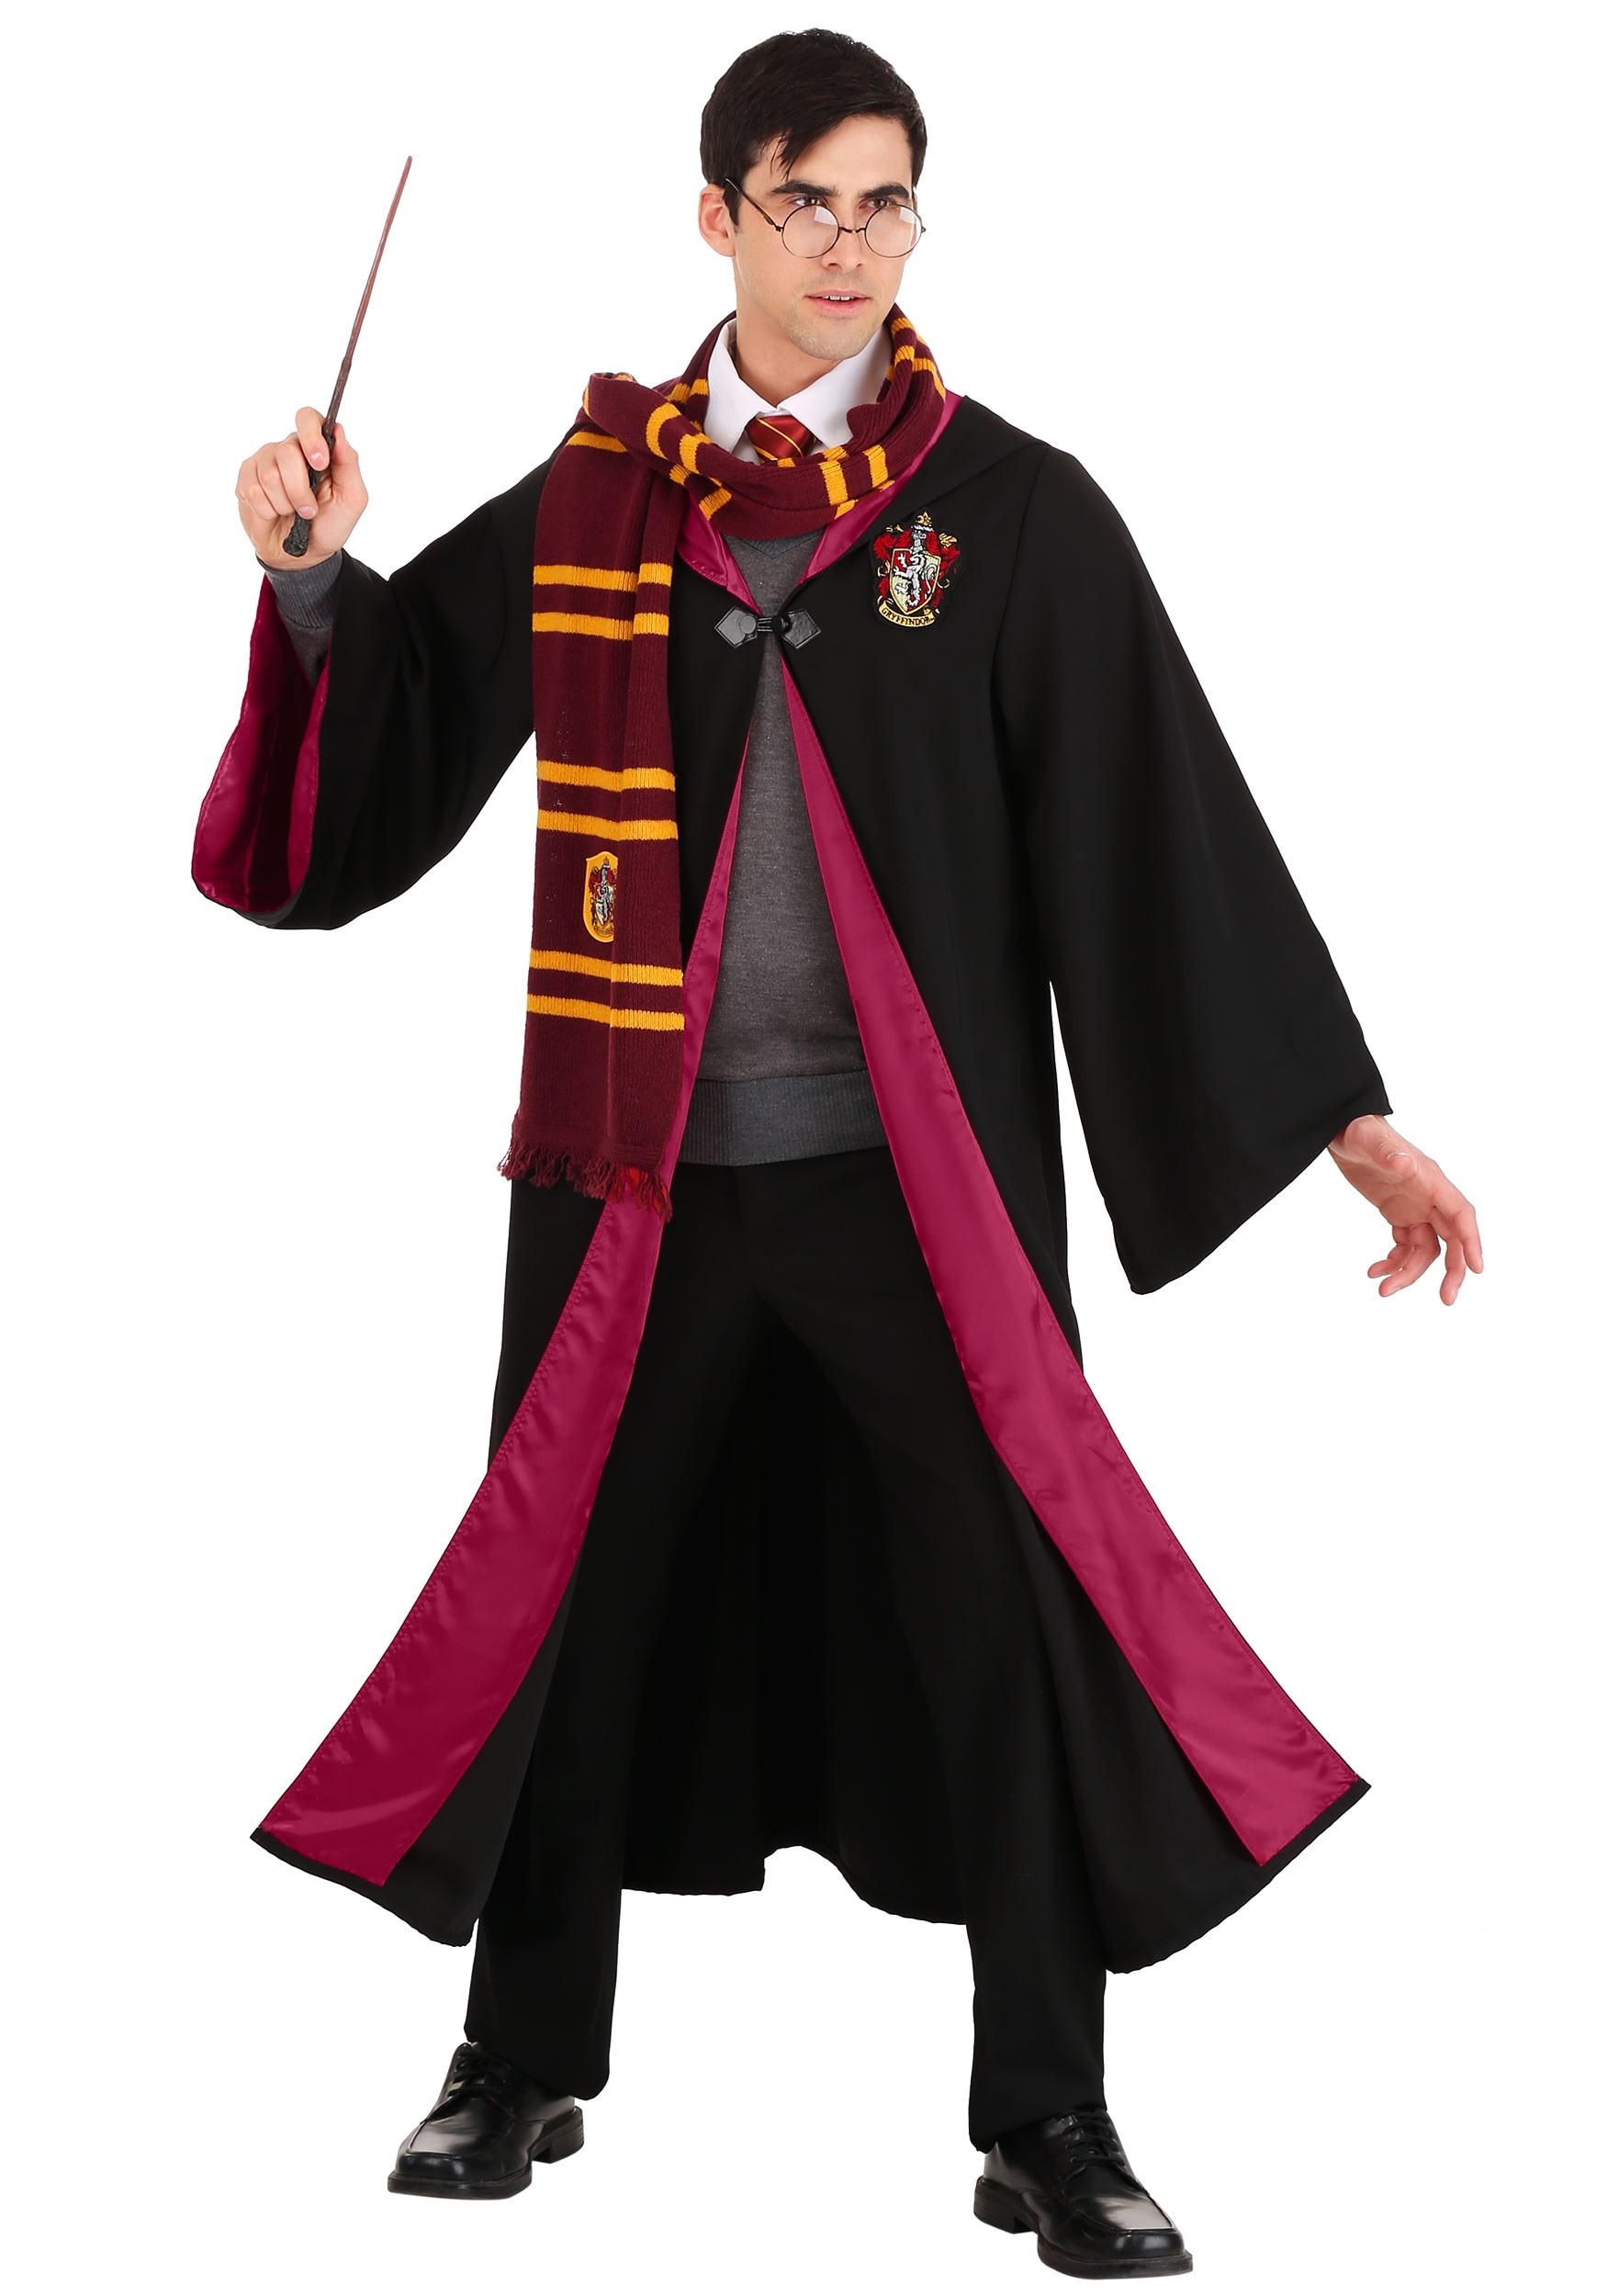 https://images.halloweencostumes.ca/products/64162/1-1/deluxe-harry-potter-adults-costume.jpg